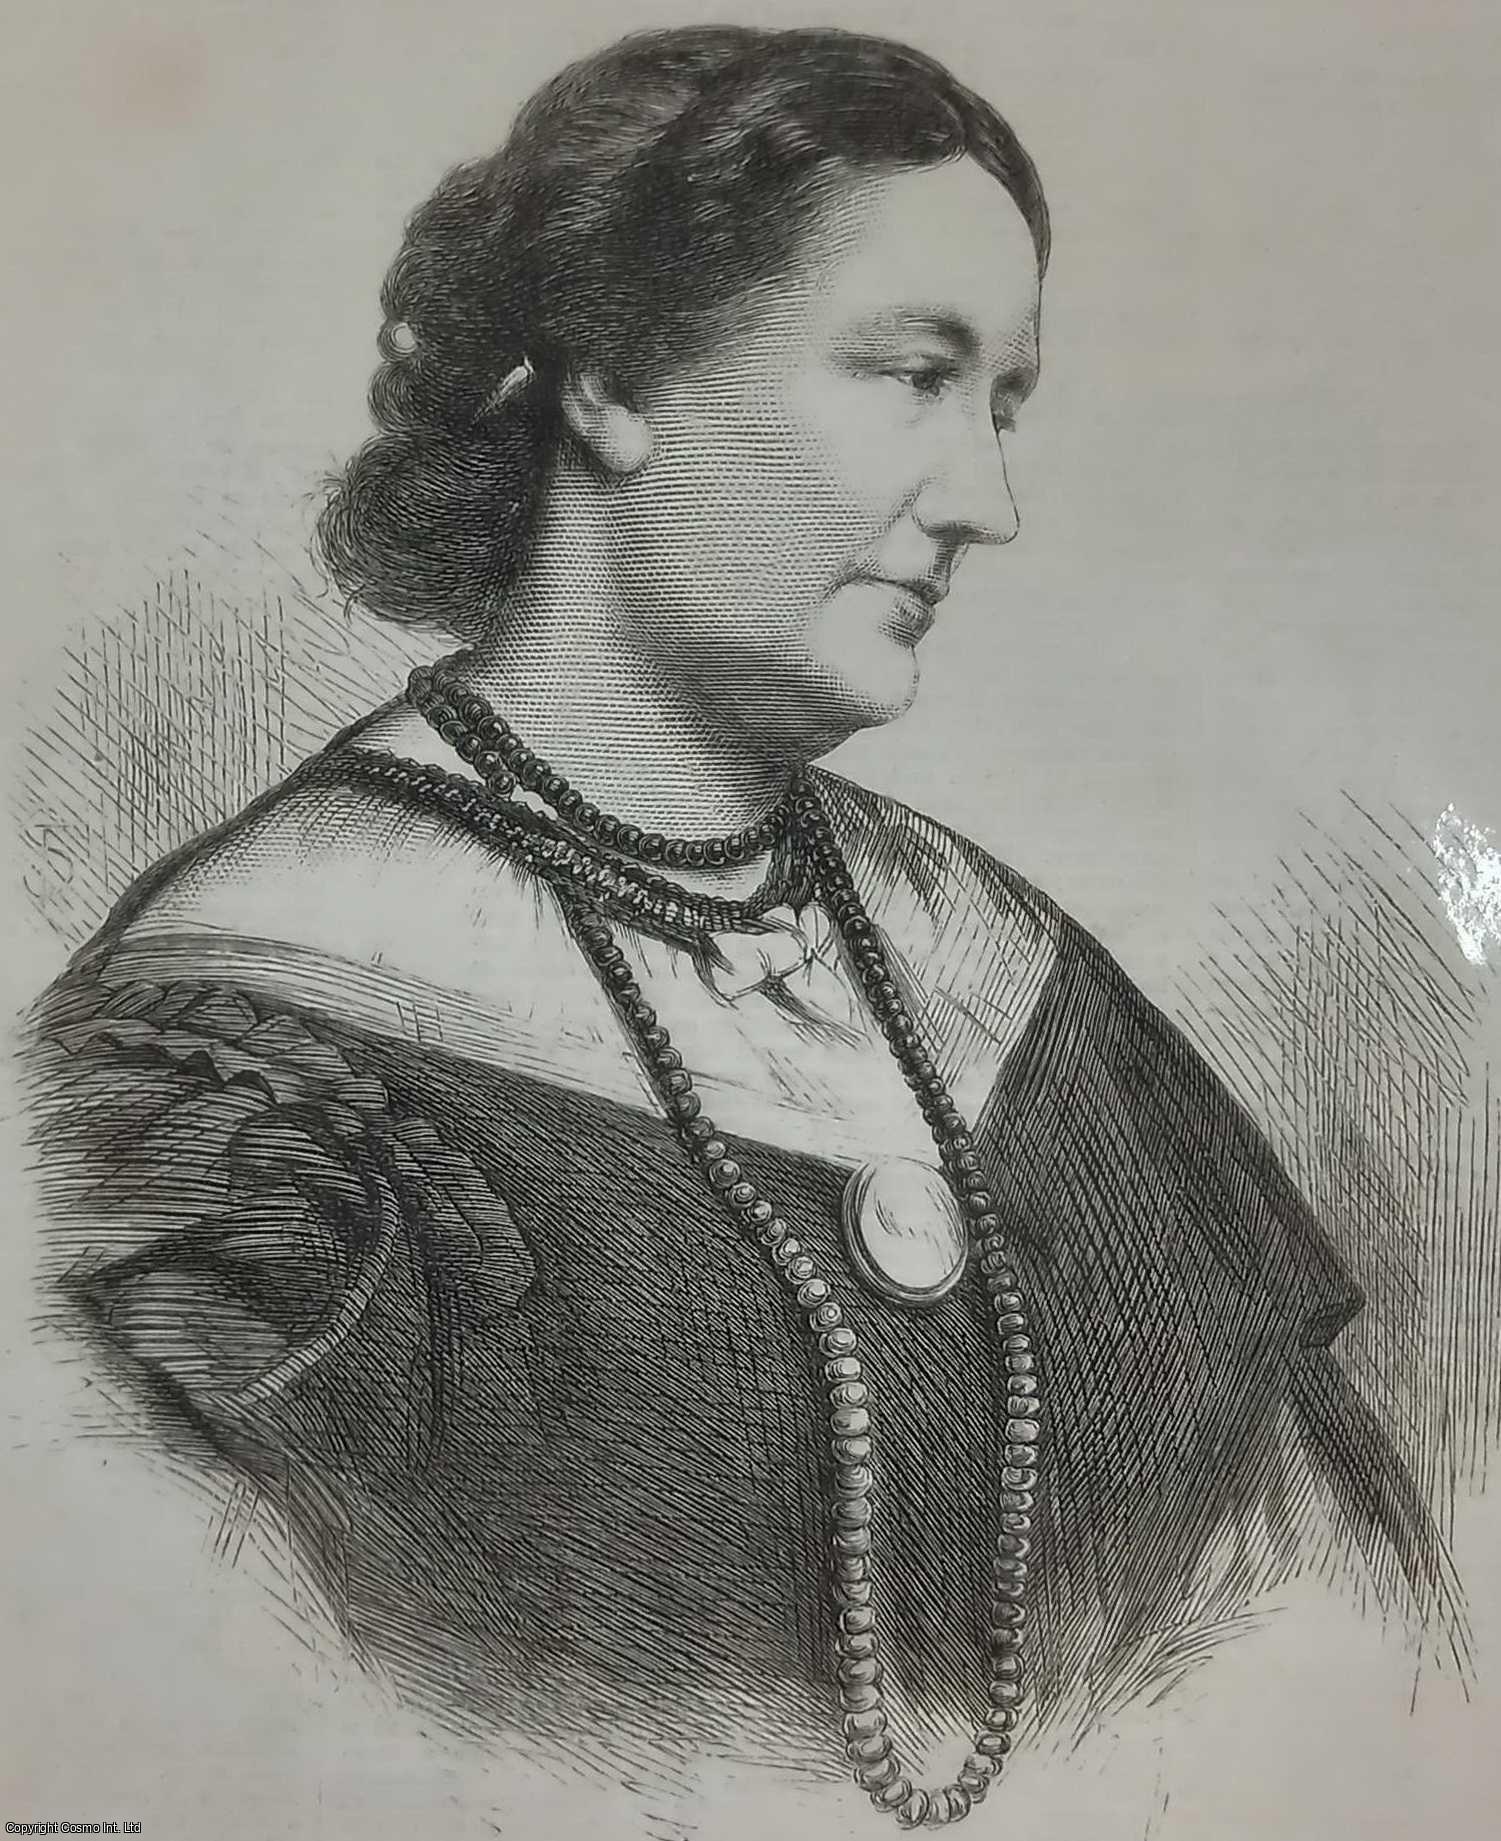 PORTRAIT - Madame Grisi, Great Operatic Singer. An original print and obituary from the Illustrated London News, 1869.